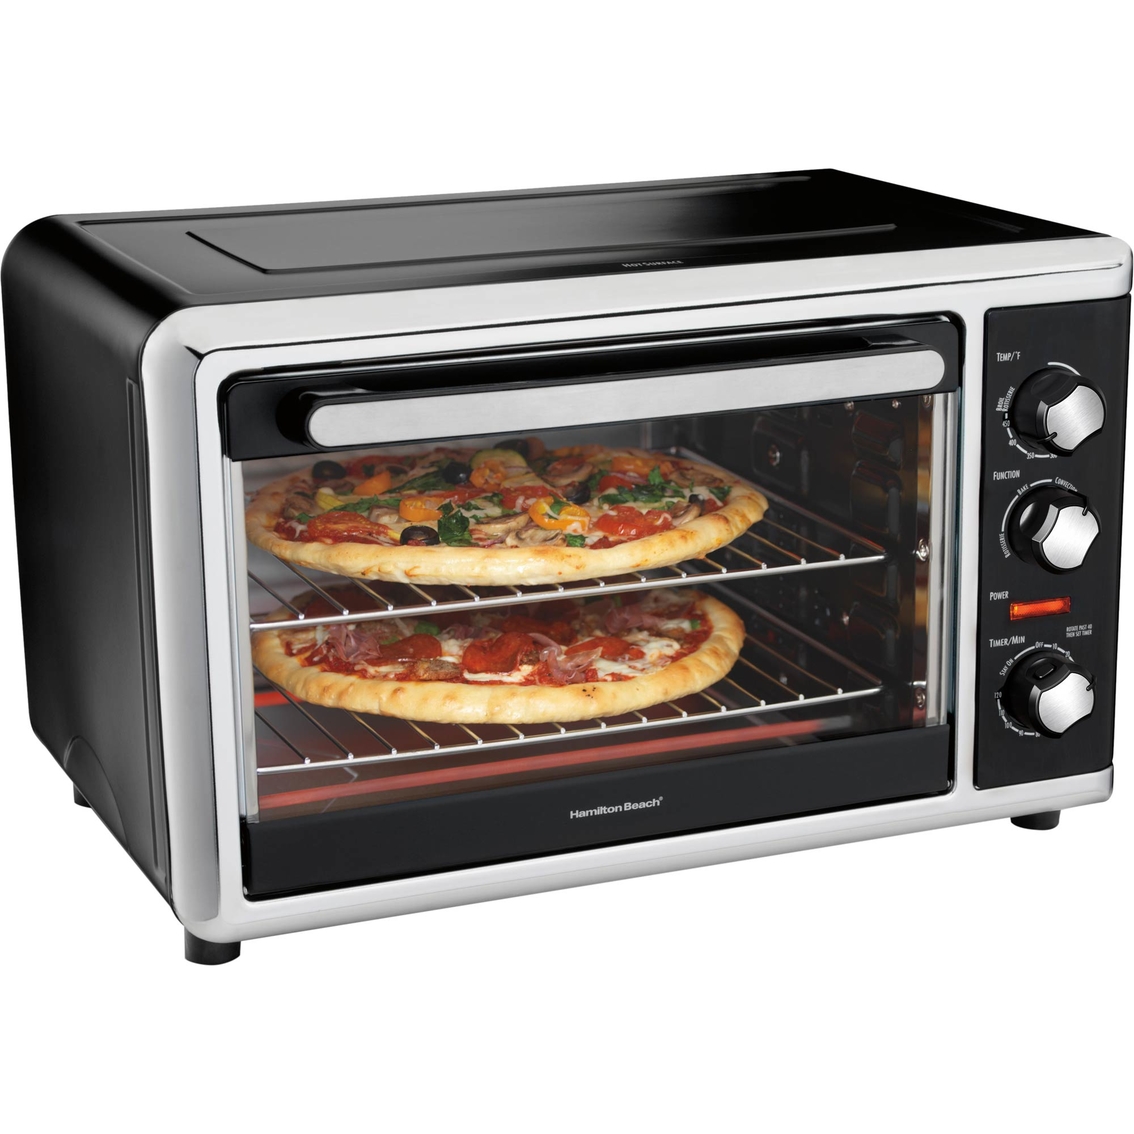 Hamilton Beach Convection Toaster Oven | Toasters & Ovens | Furniture